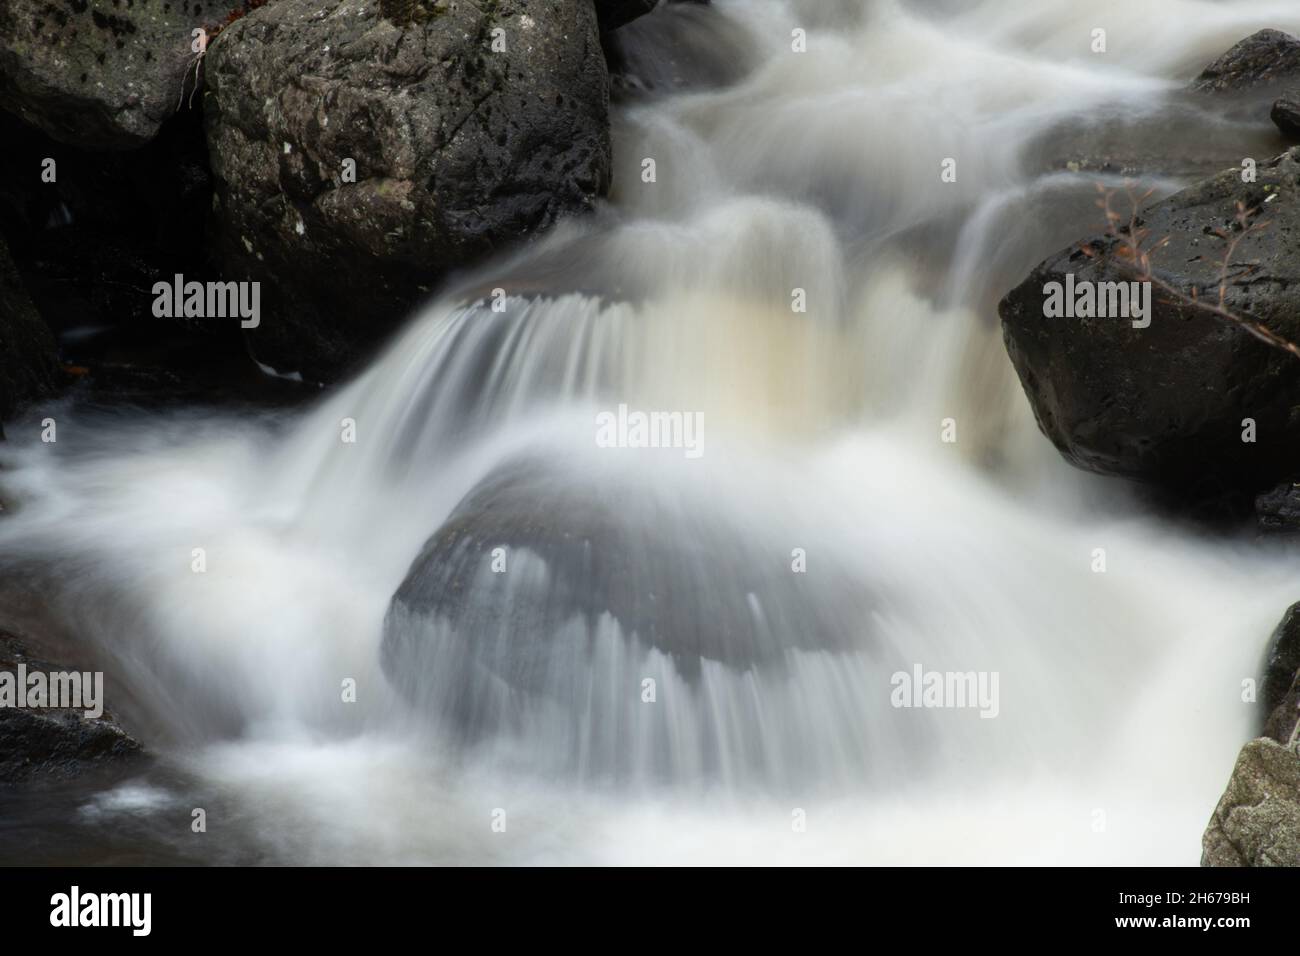 Close-up of a waterfall with water rushing over boulders, UK Stock Photo